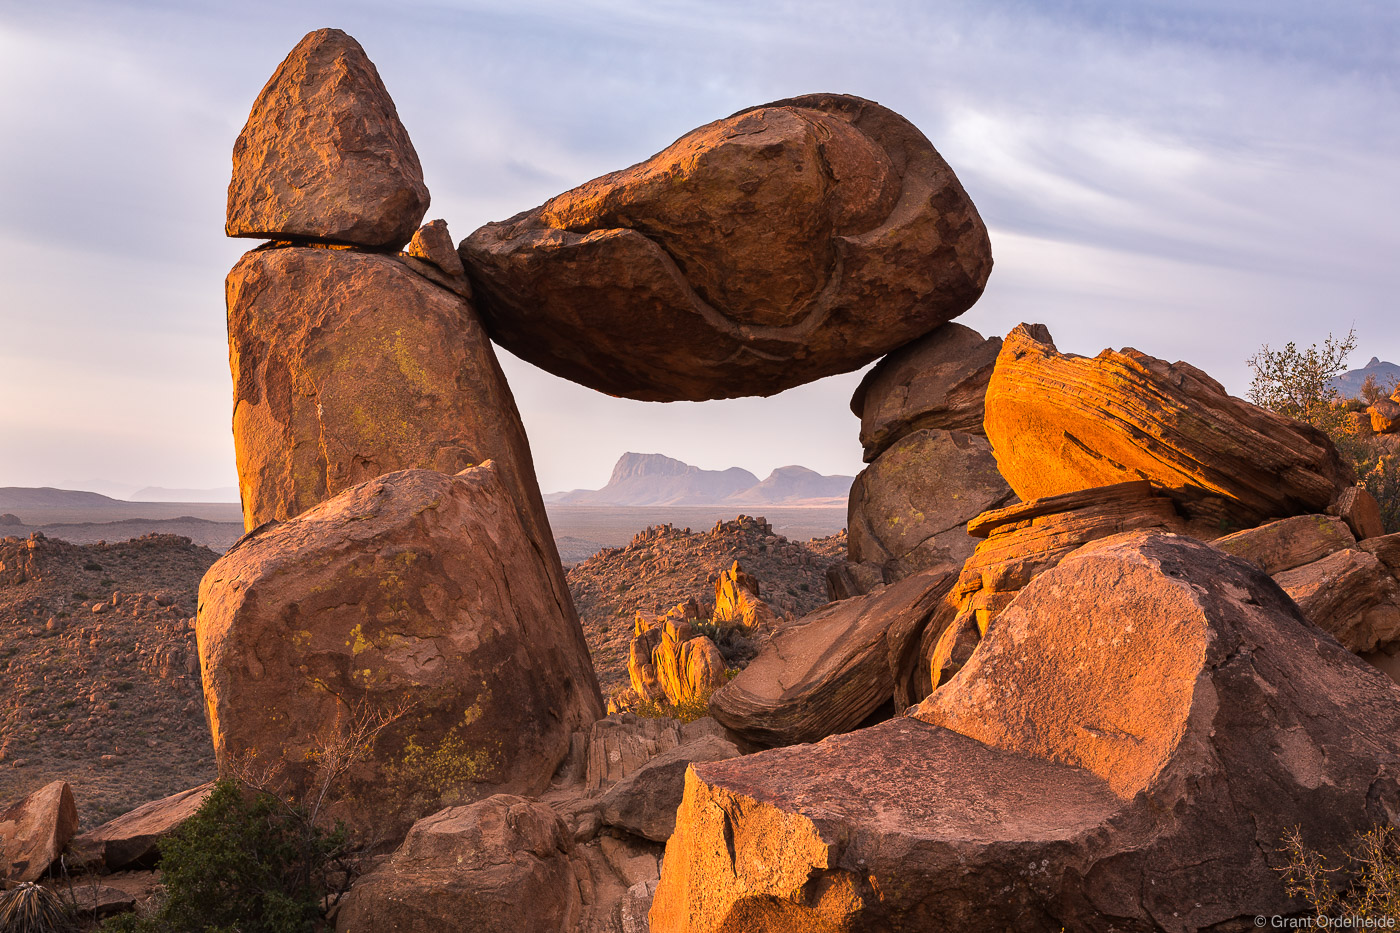 Sunrise over Balanced Rock in Big Bend National Park located in western Texas.